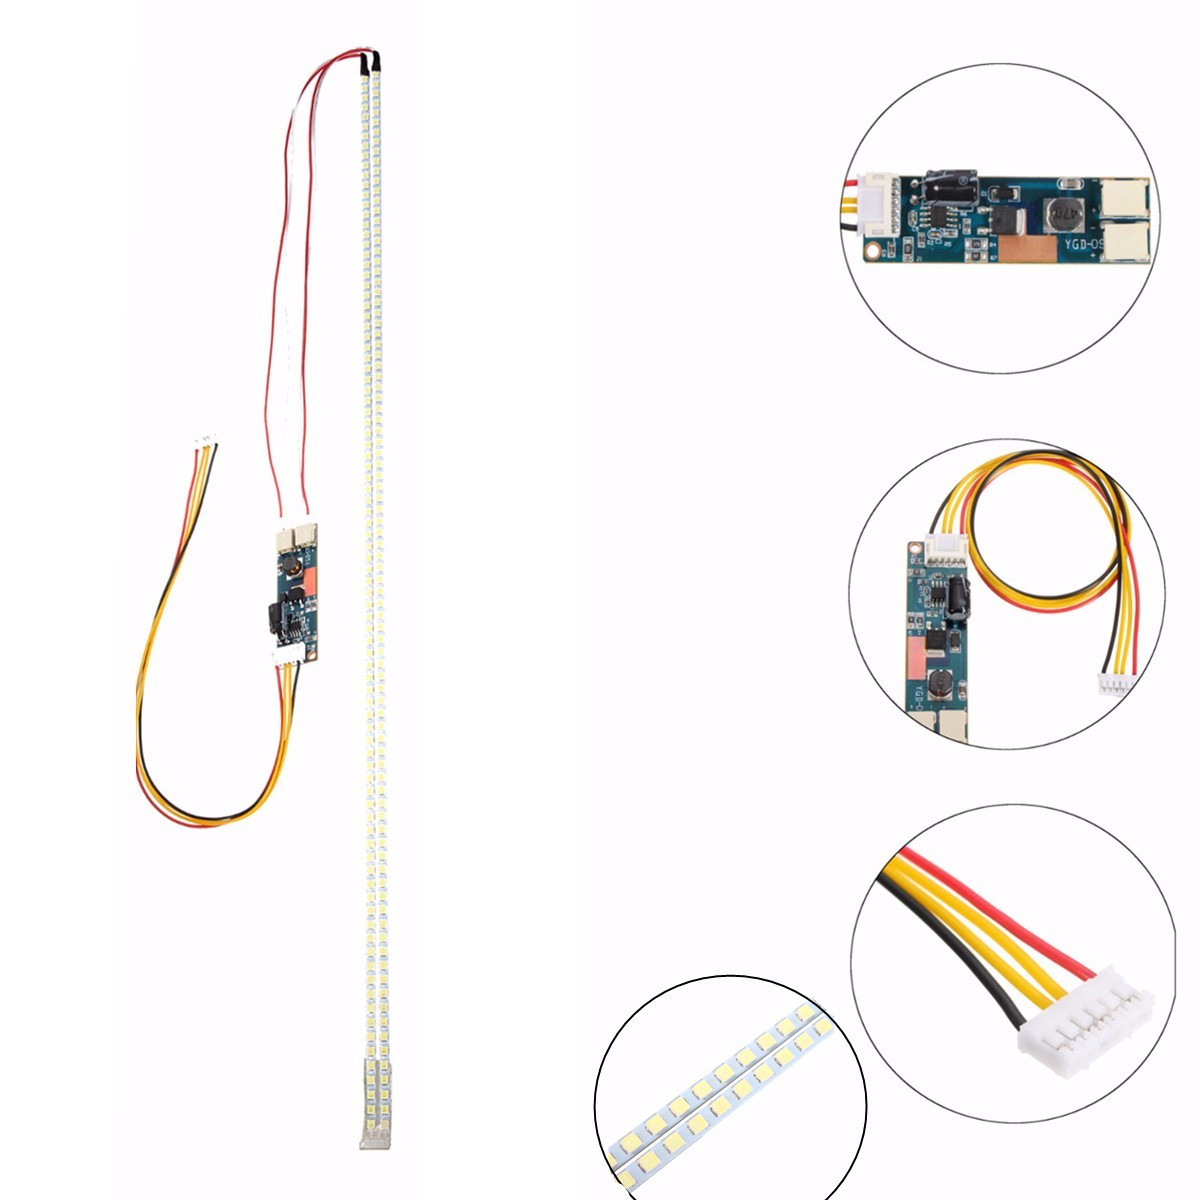 

540mm LED Backlight Strip Kit Adjustable Update 24x24 Inch CCFL LCD Screen to LED Monitor Module